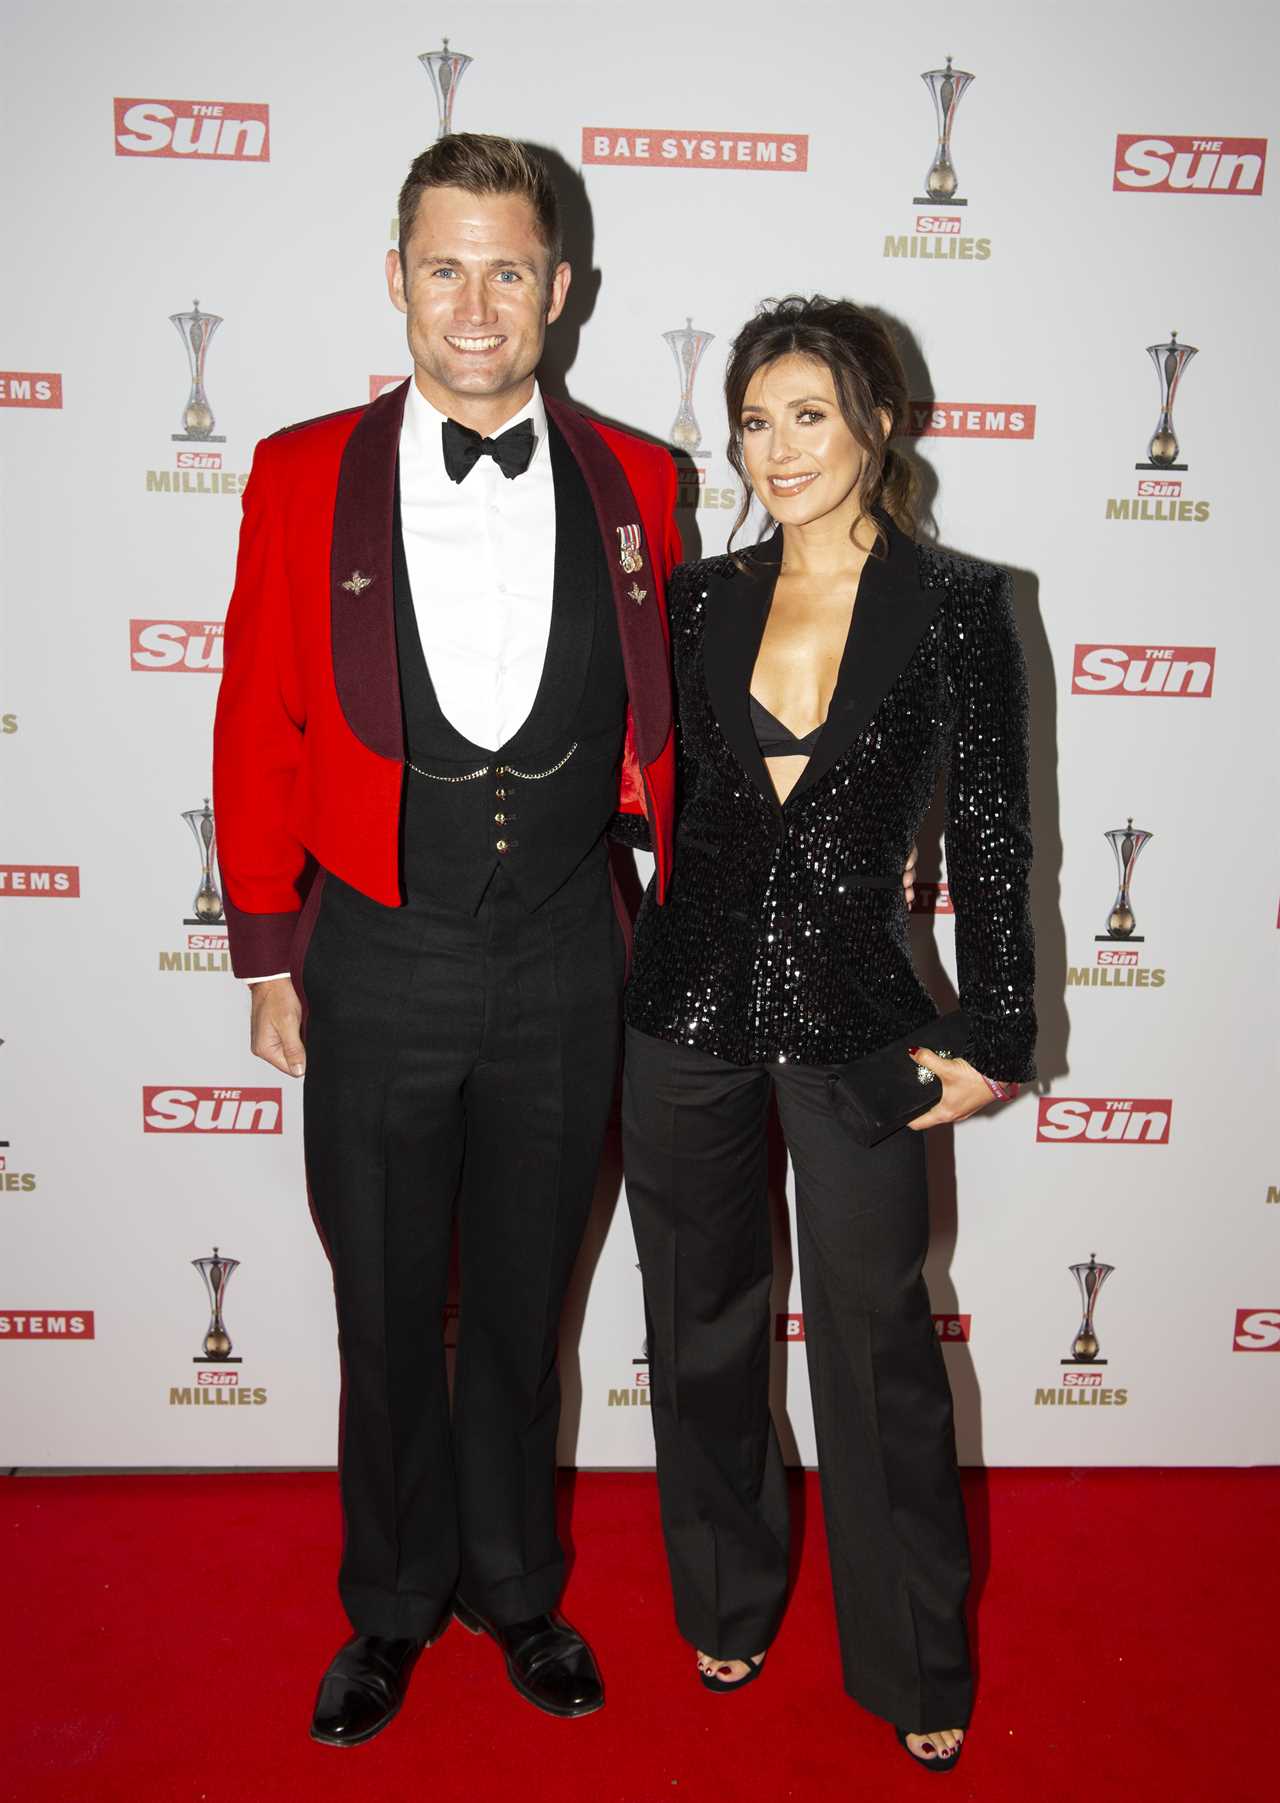 Kym Marsh ditches wedding ring as she enjoys glam night out after marriage split